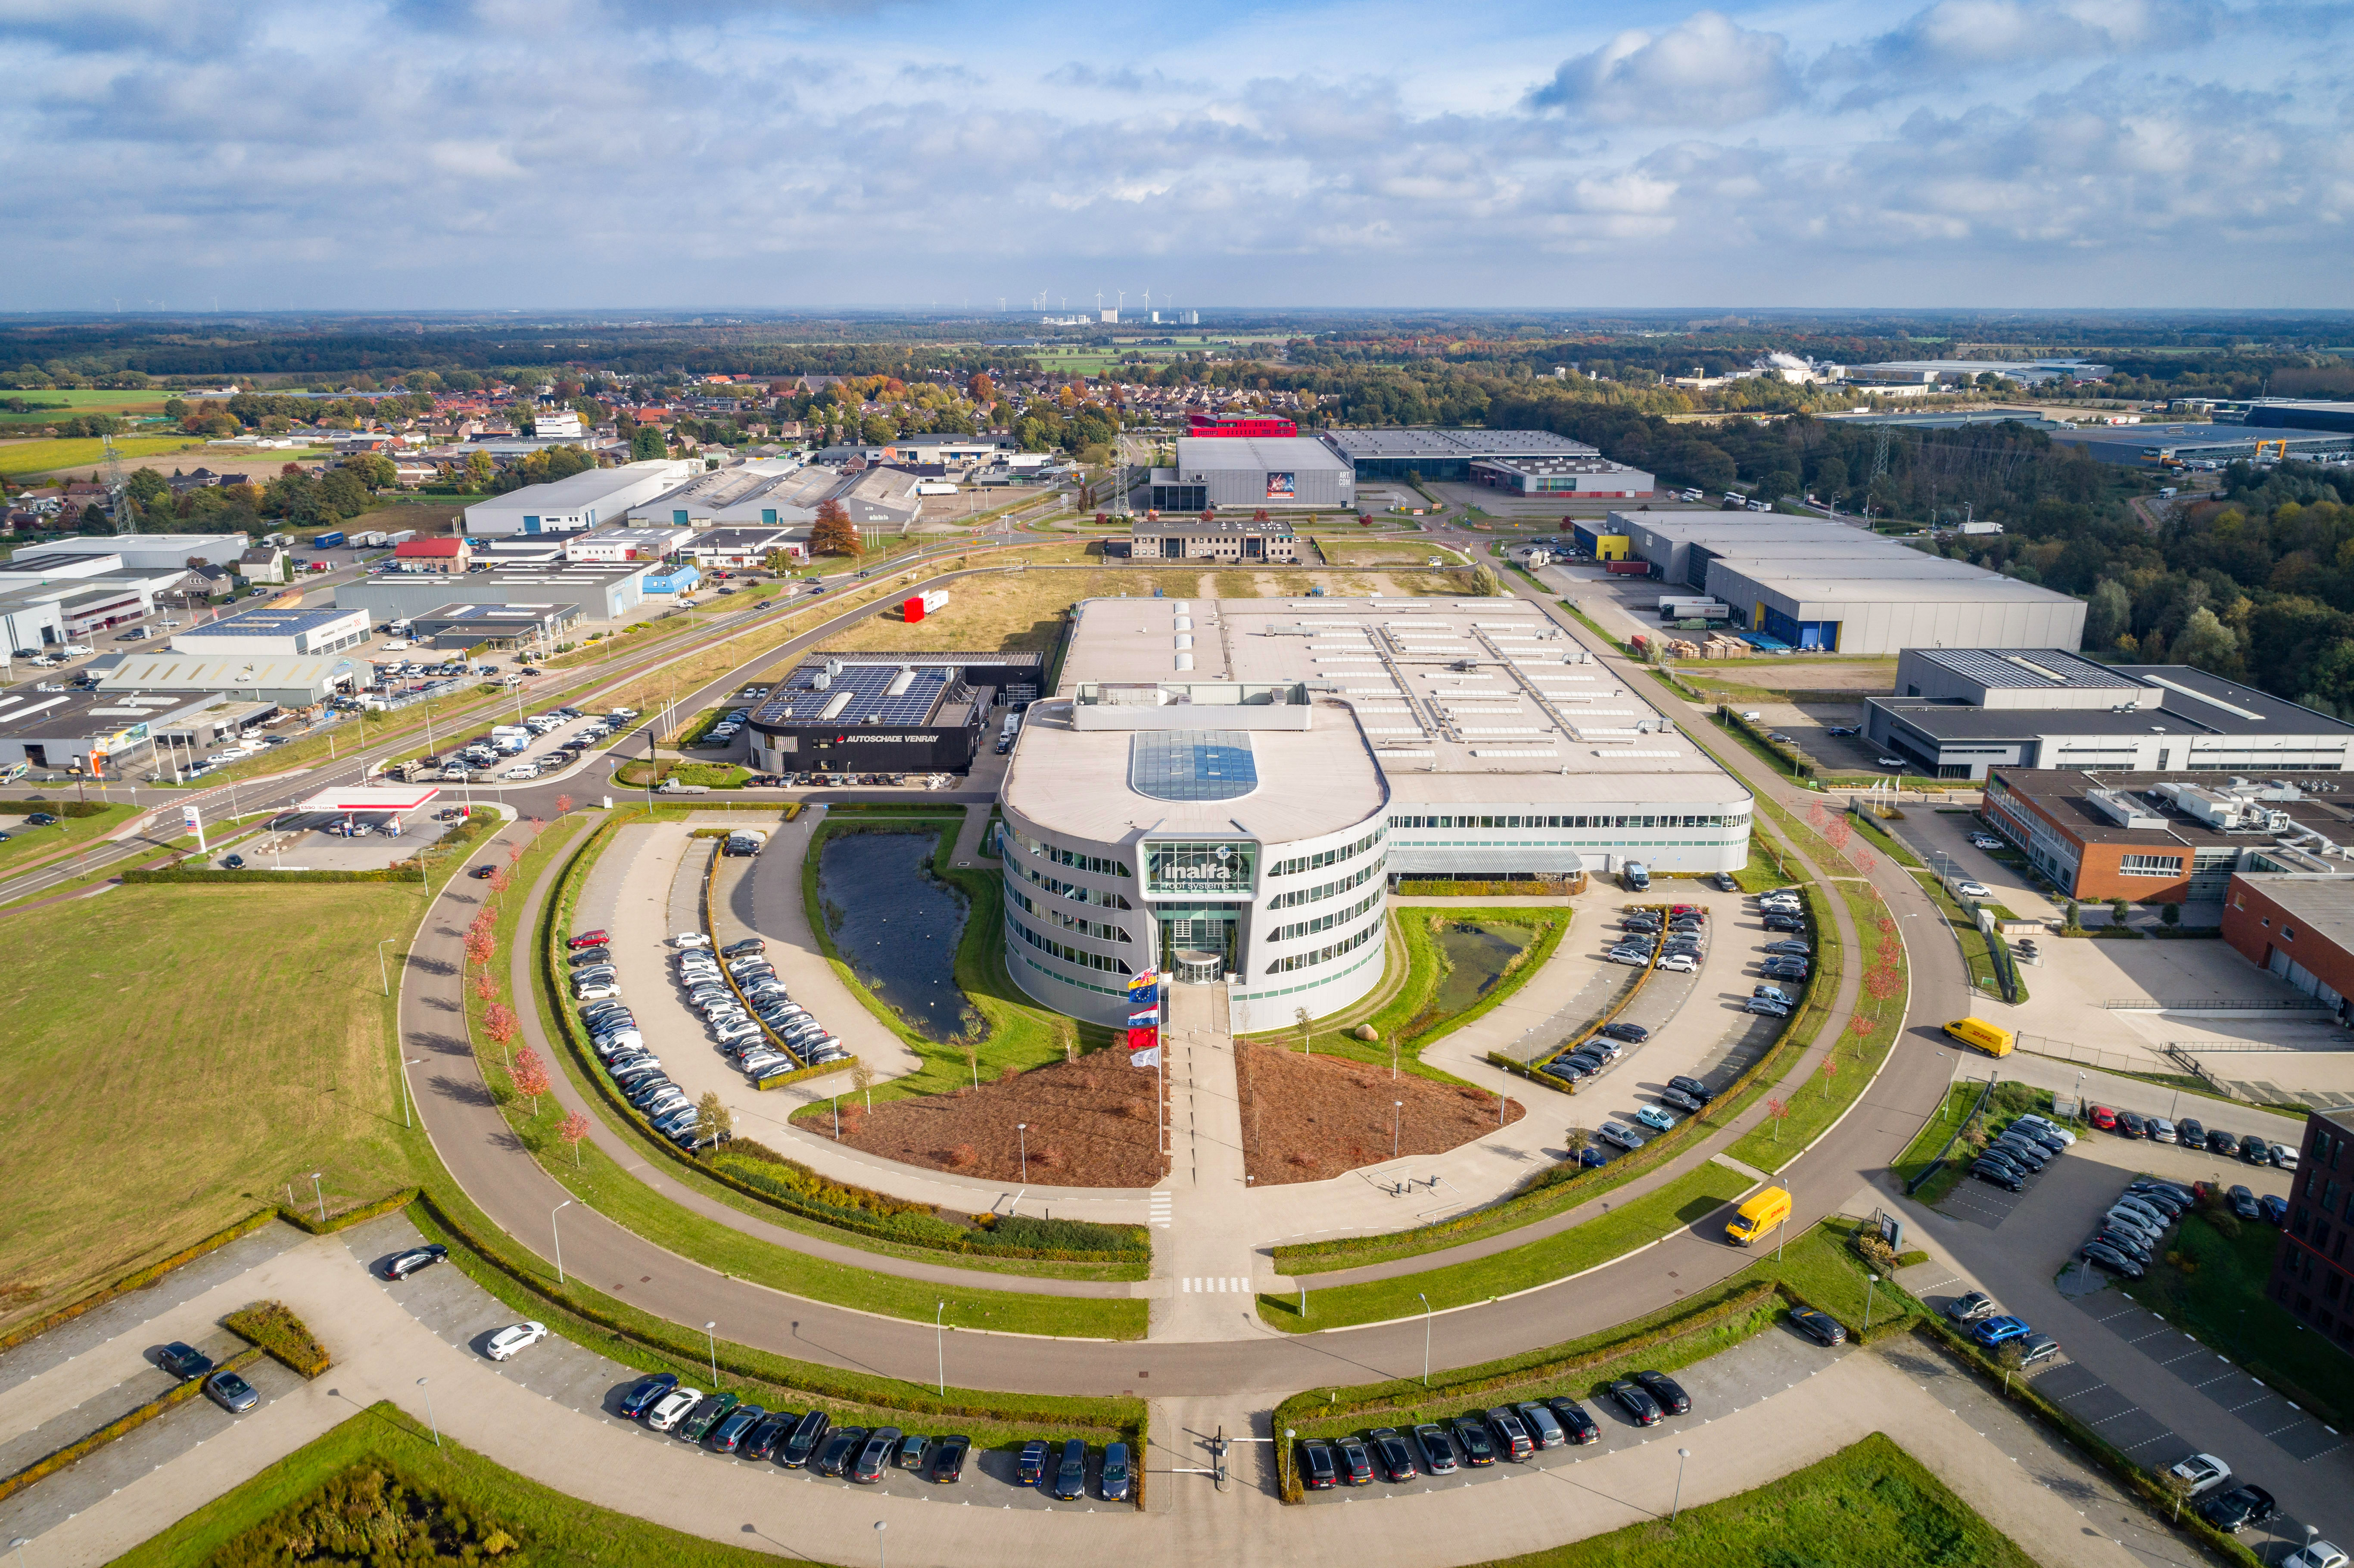 Venray - bird's eye view of logistics building surrounded by other buildings, landscaping and roadways and parking.